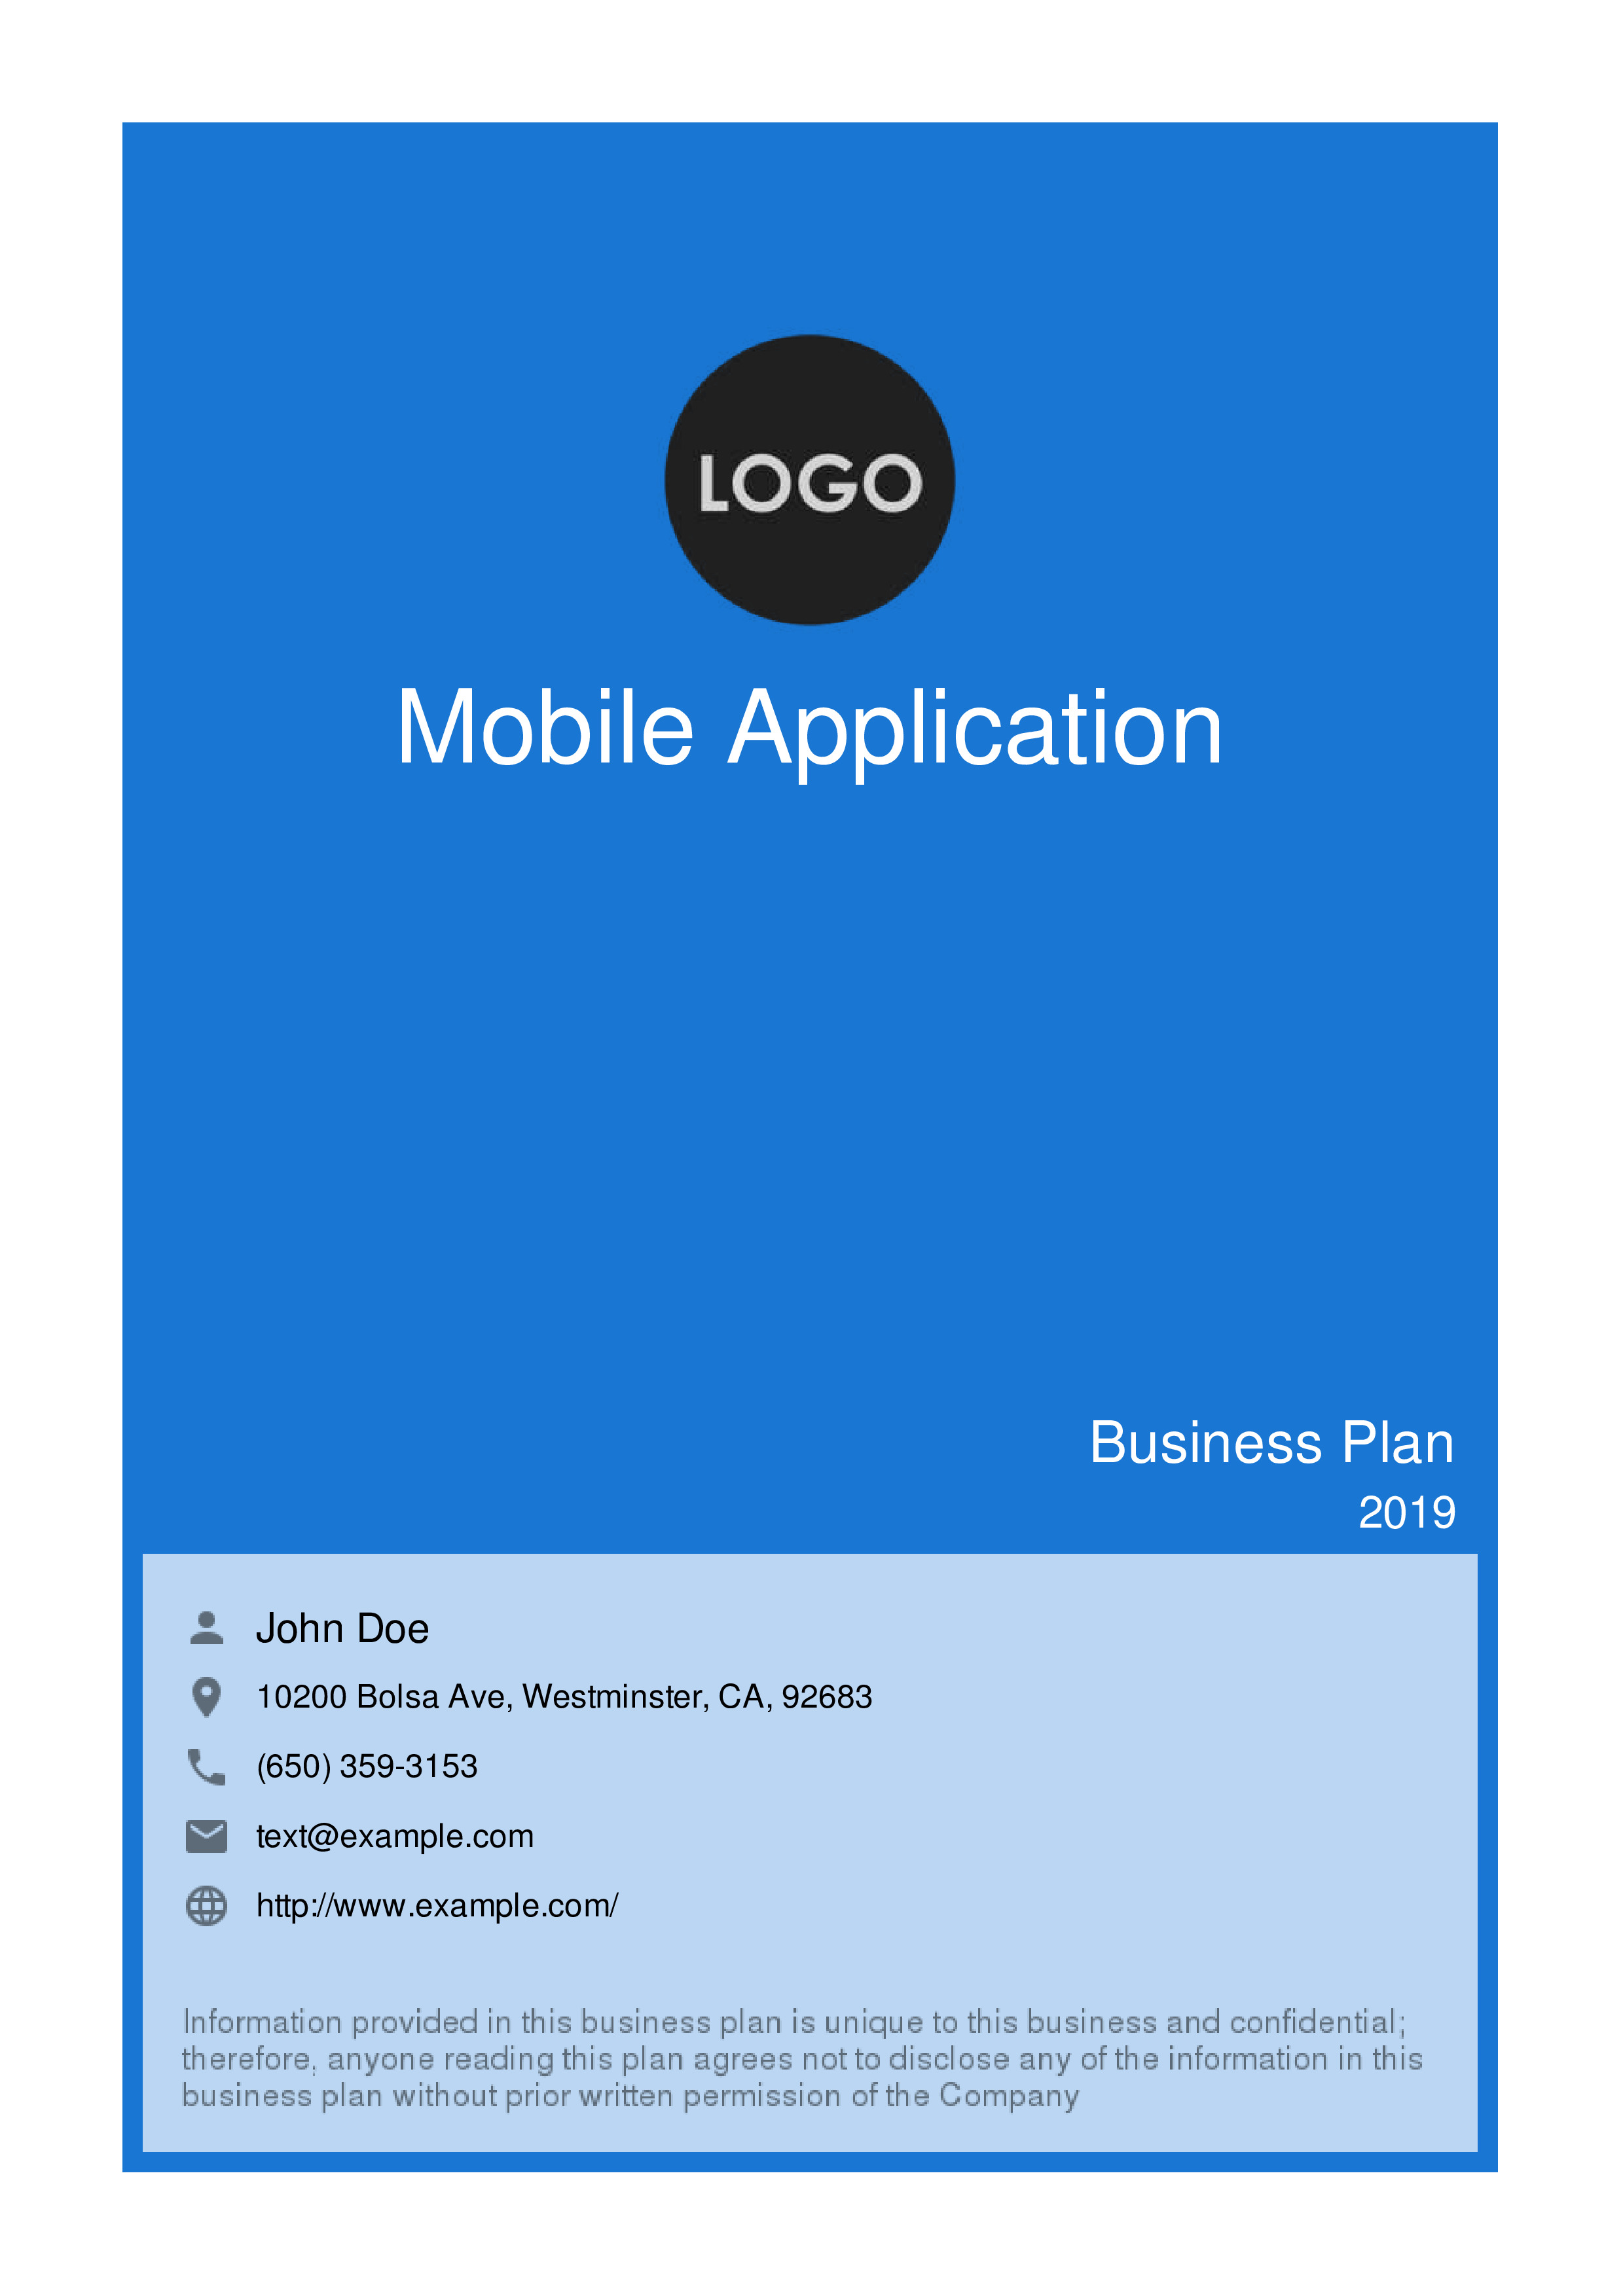 business plan for mobile software